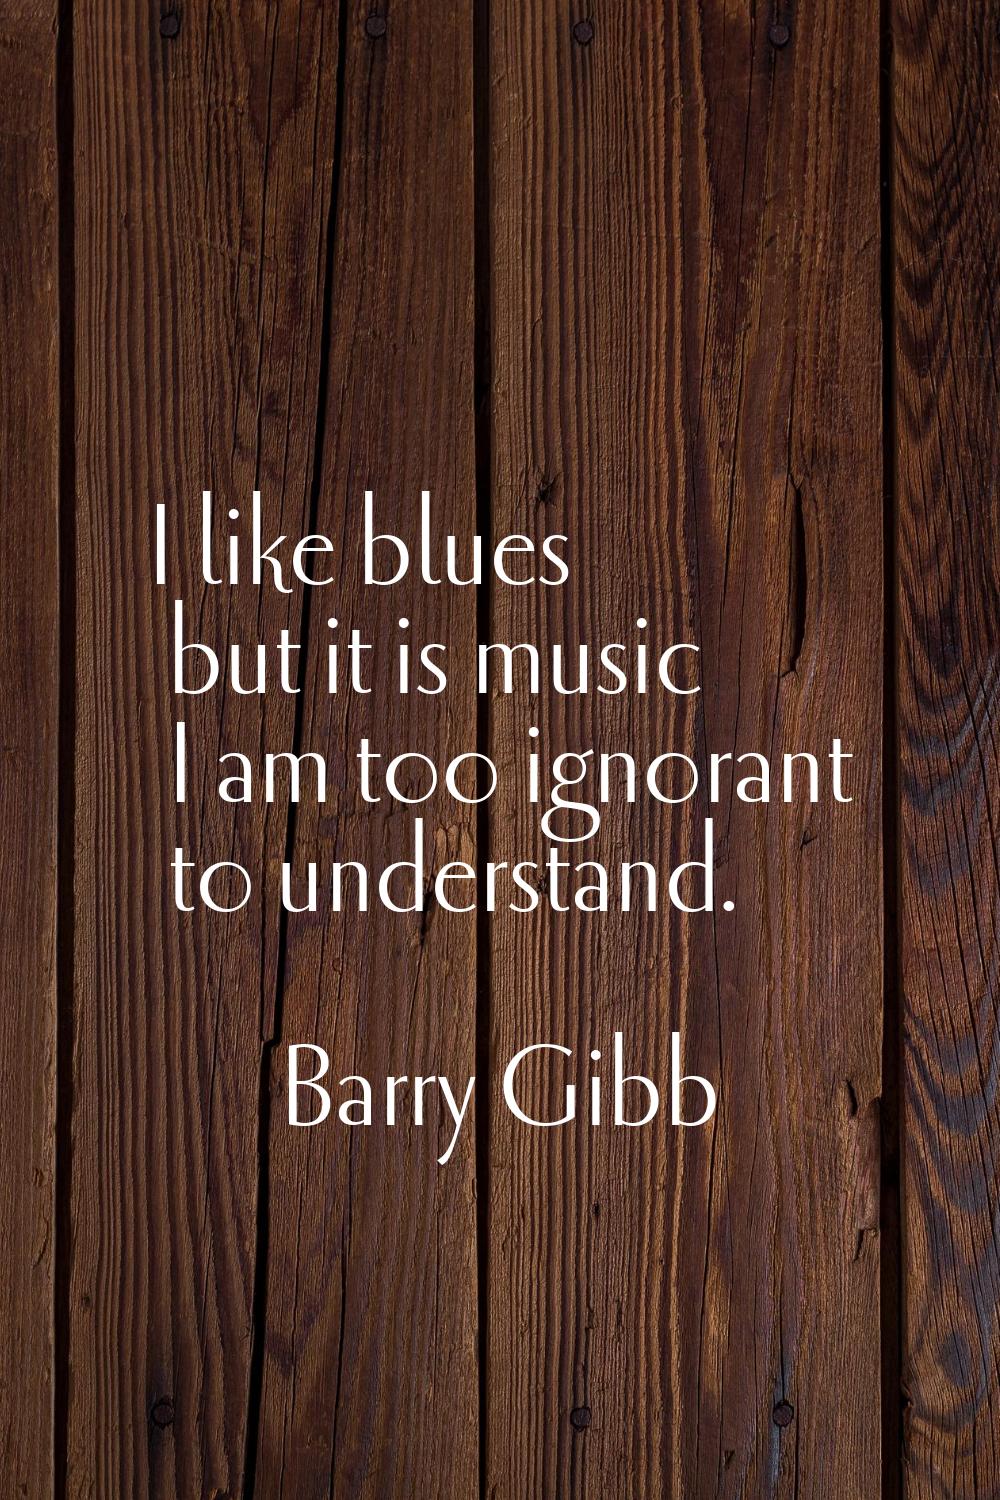 I like blues but it is music I am too ignorant to understand.